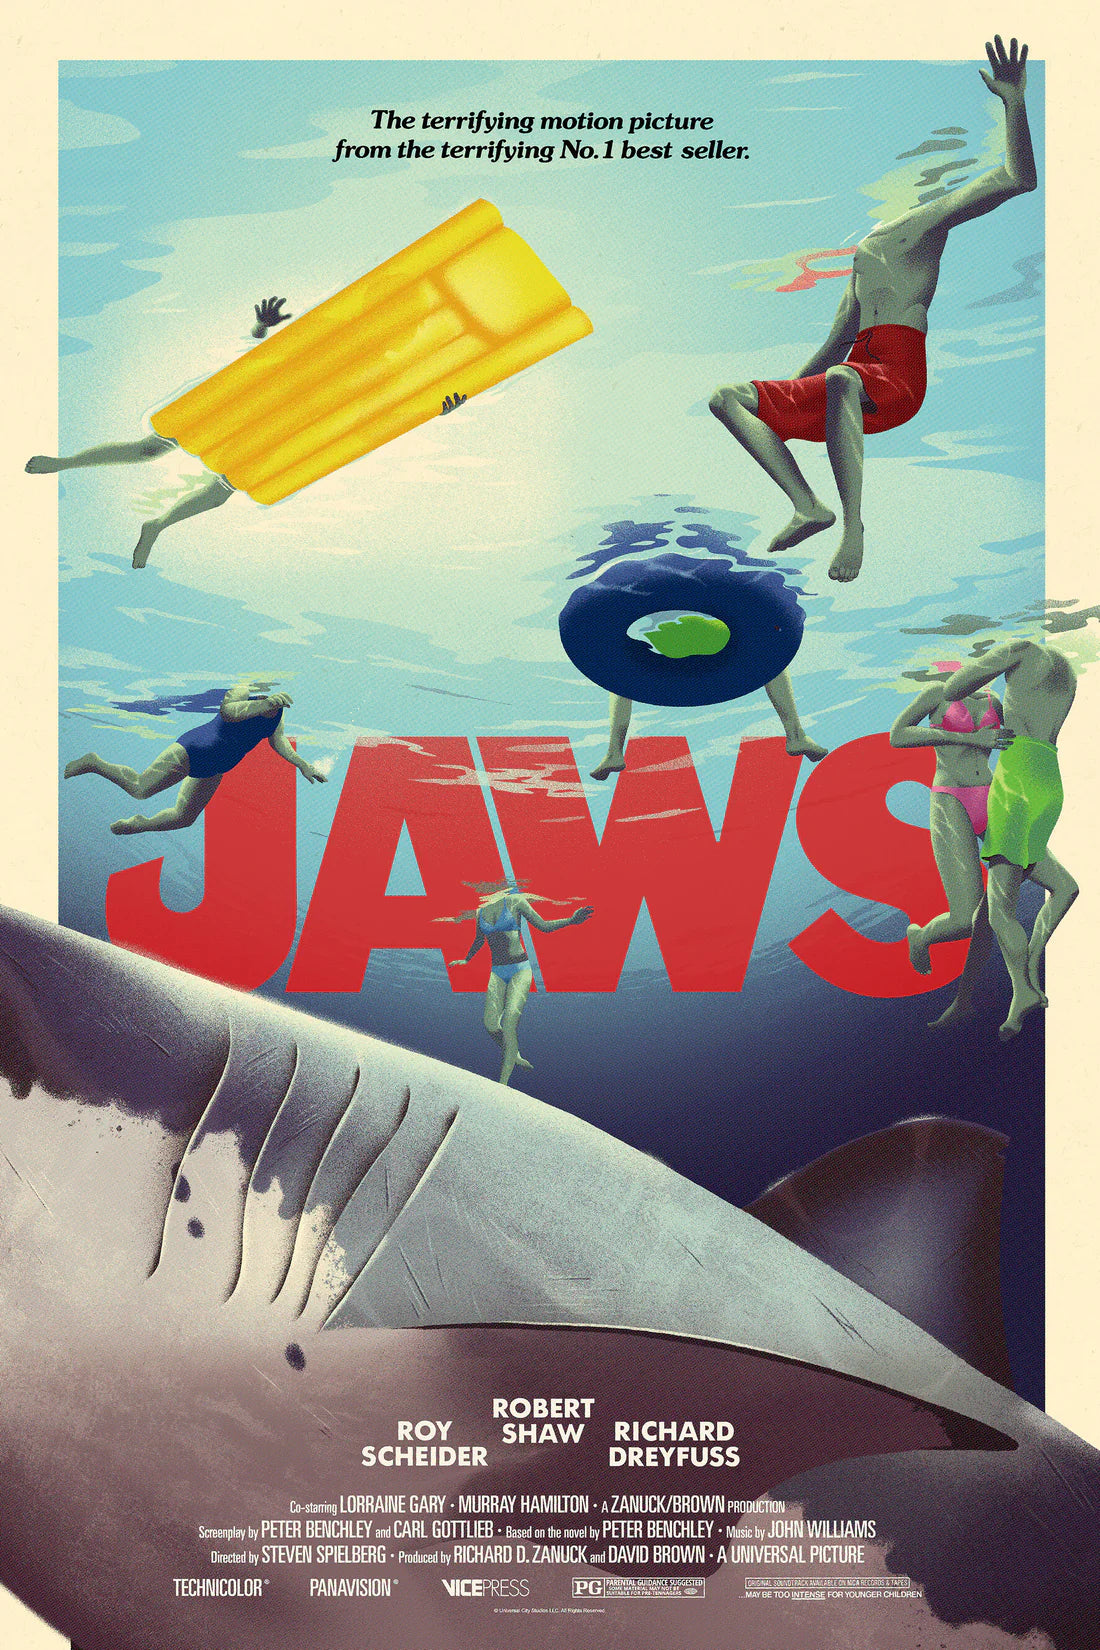 JAWS by FLOREY